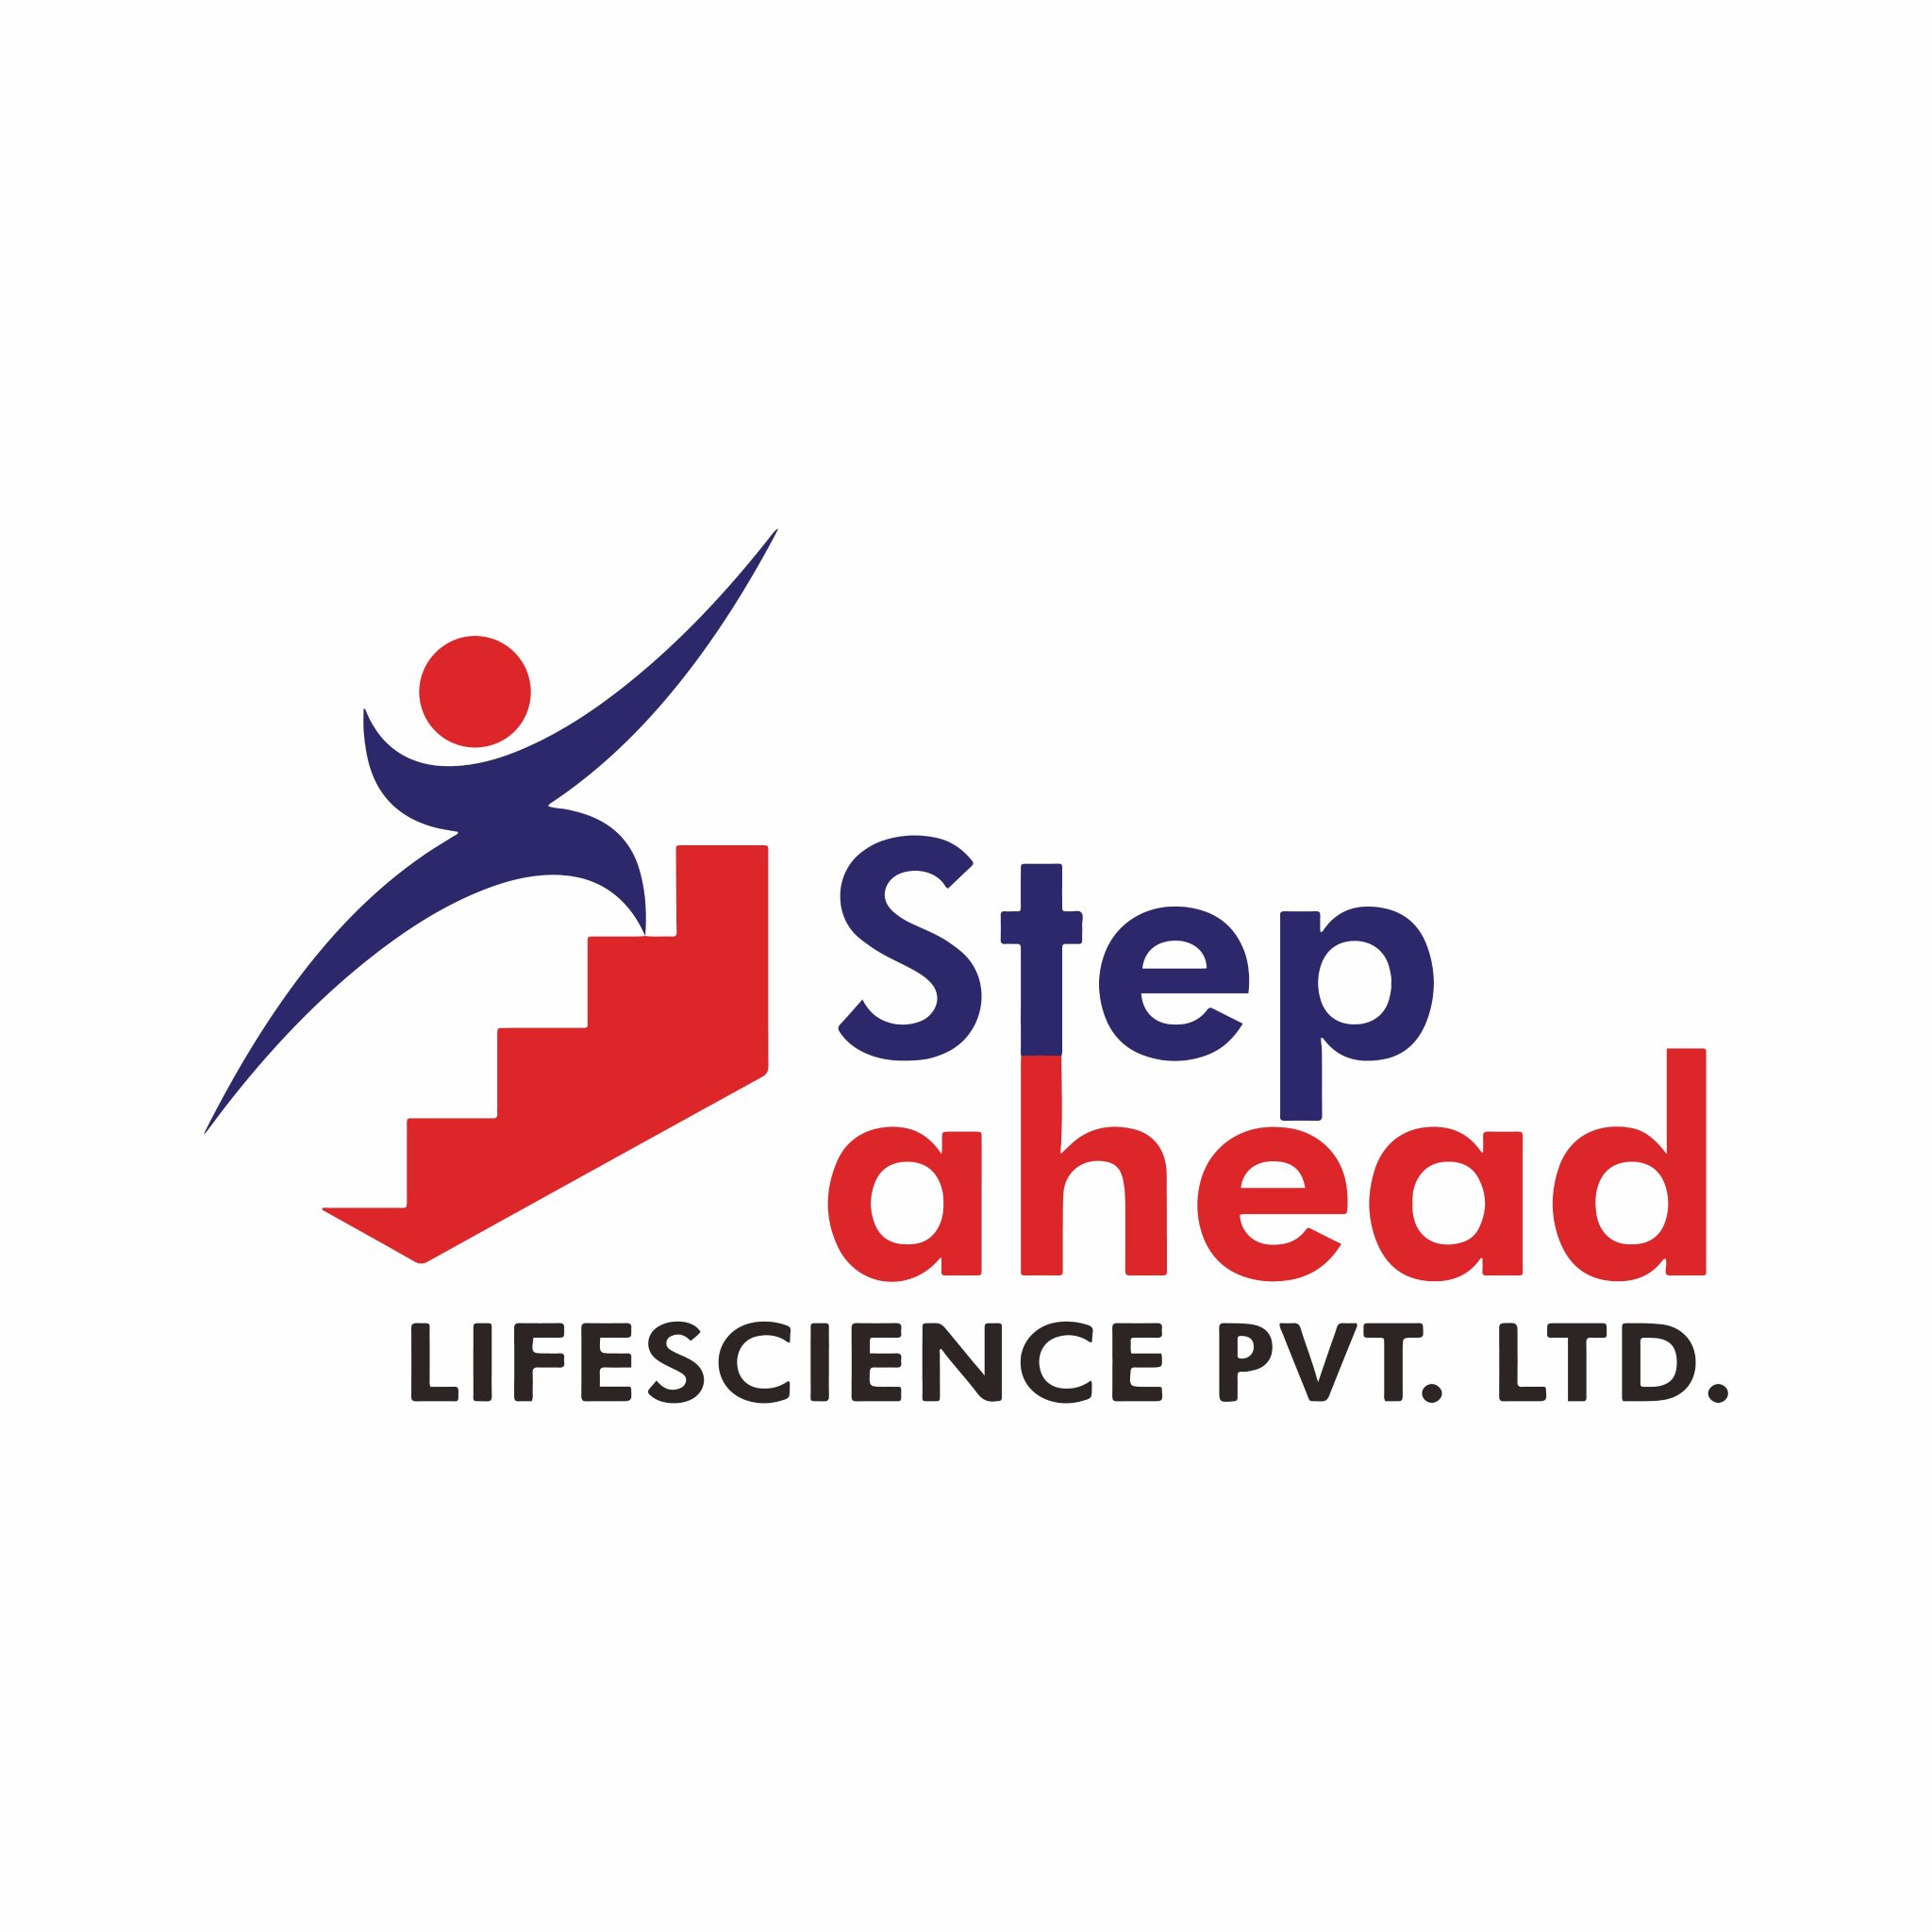 Stepaheadlifescience is an ISO 2015 certified Pharmaceutical Company involved in production of wide range of Pharmaceutical products.